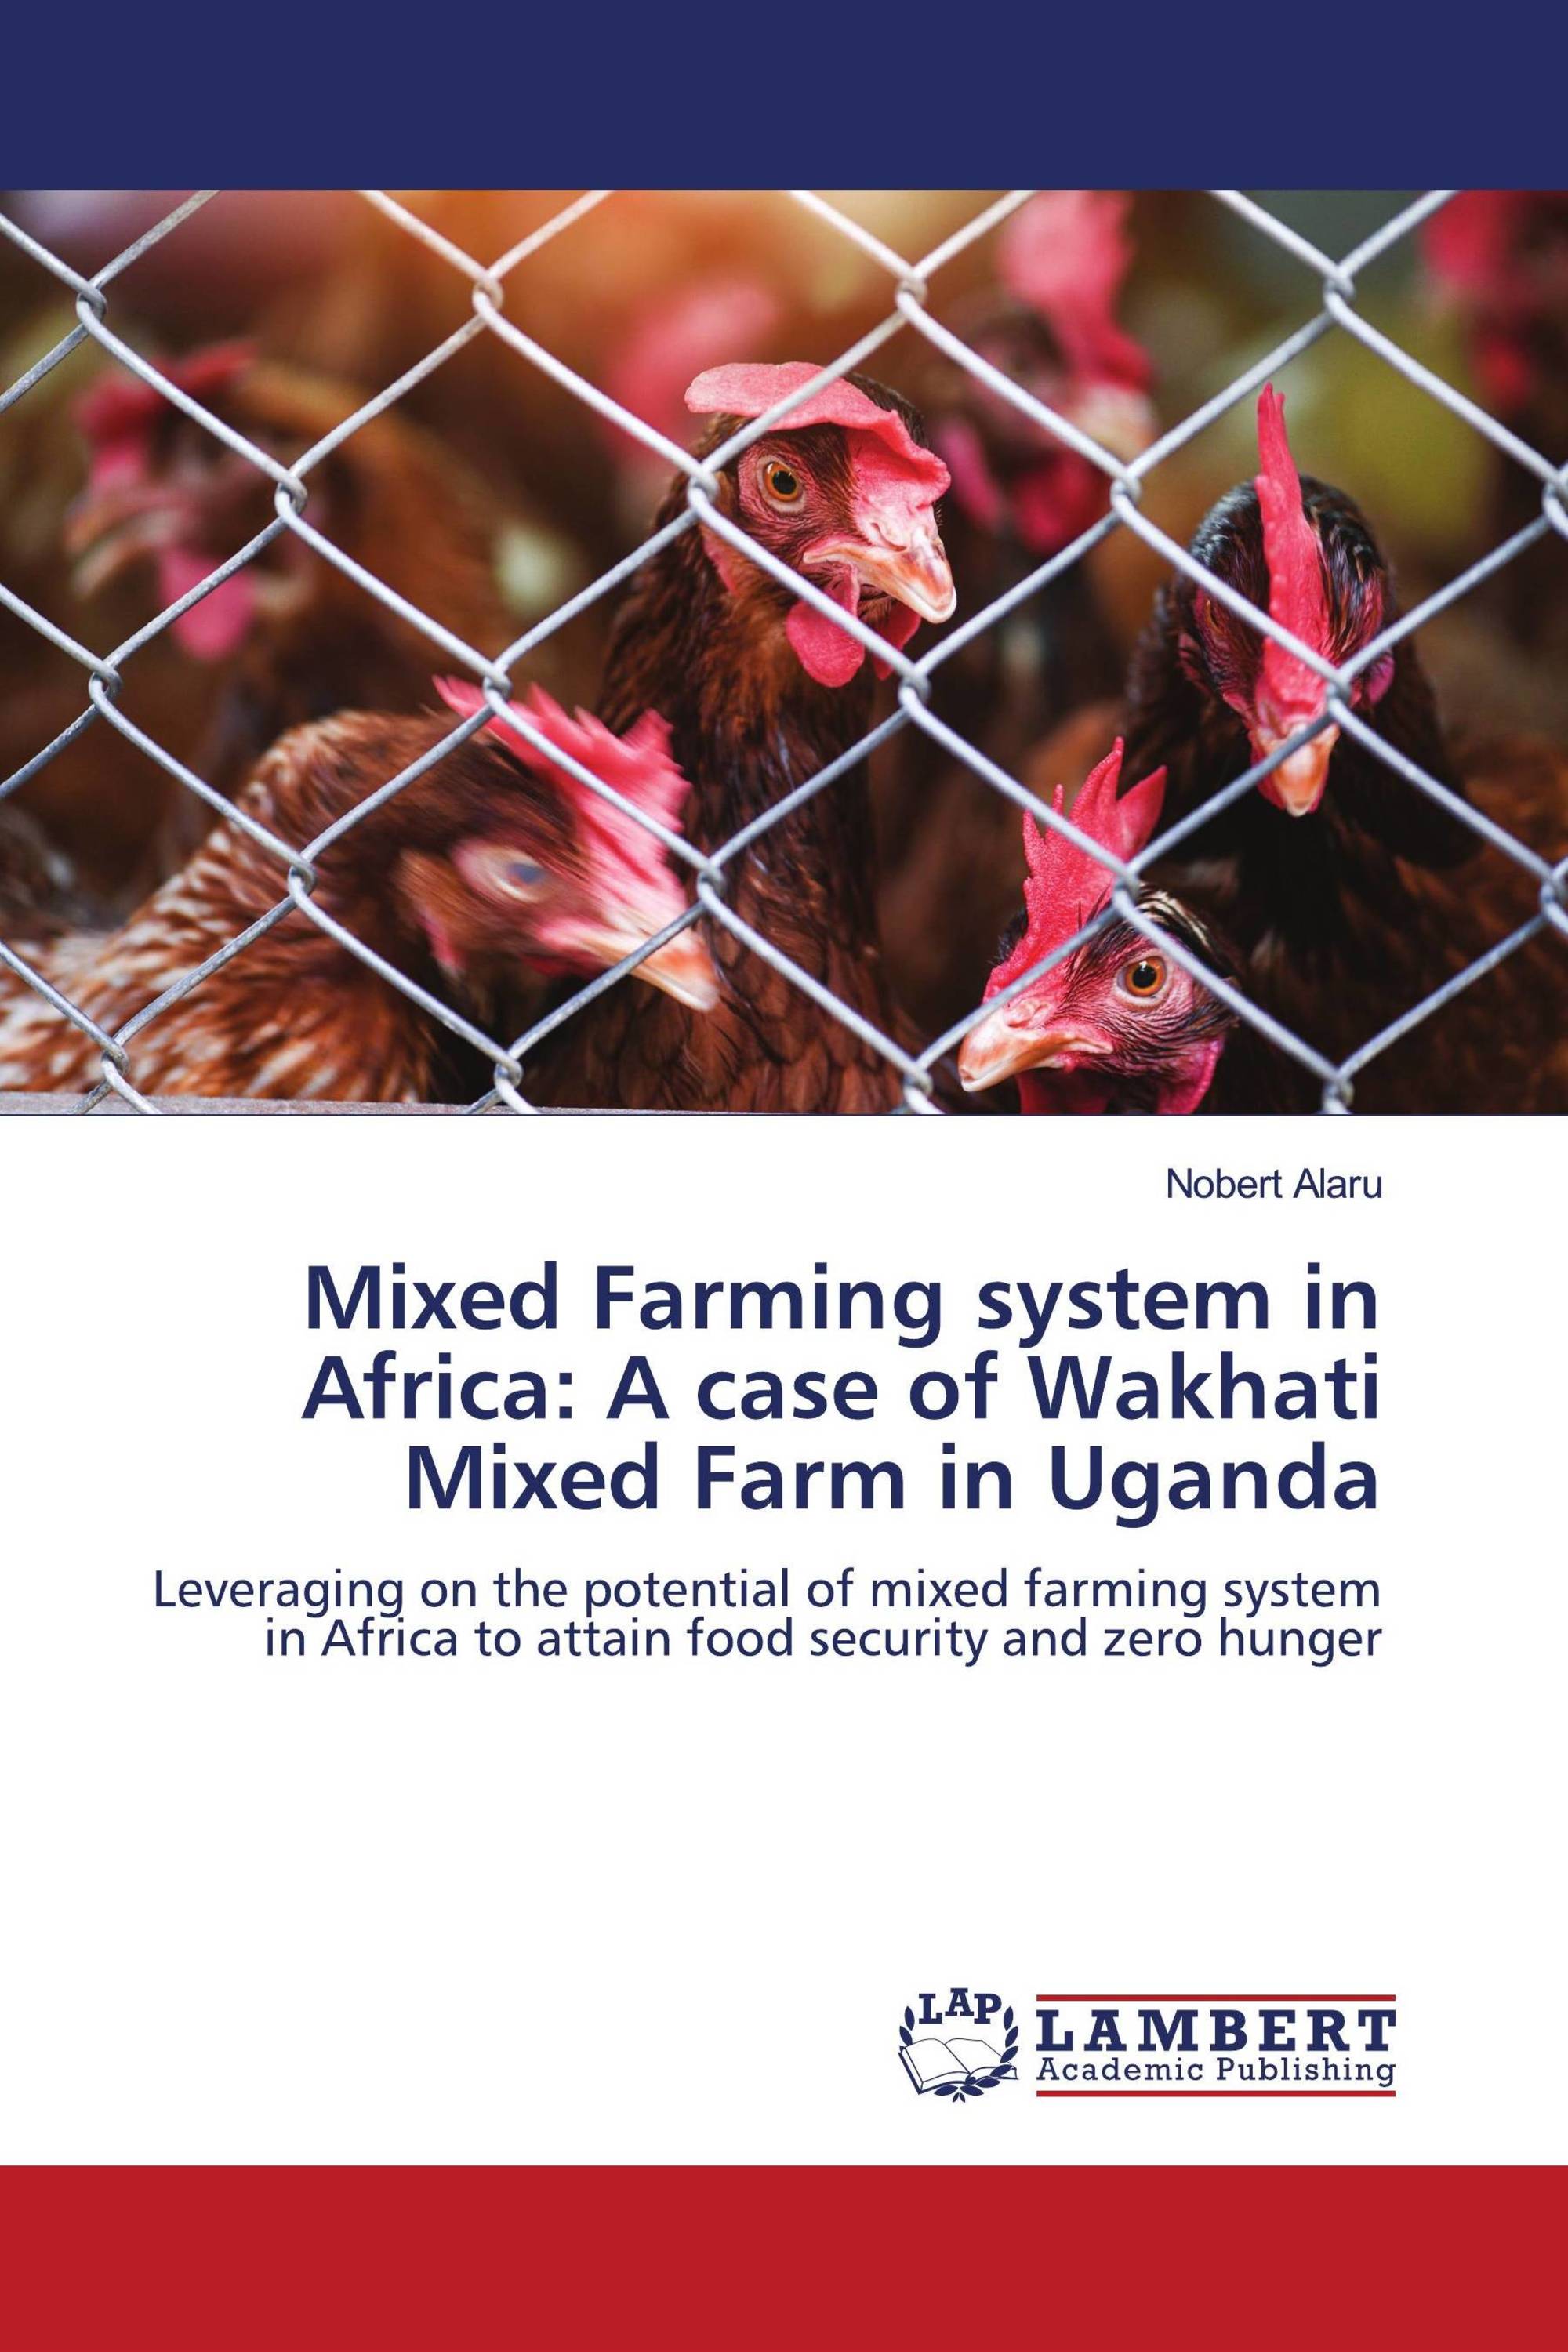 Mixed Farming system in Africa: A case of Wakhati Mixed Farm in Uganda